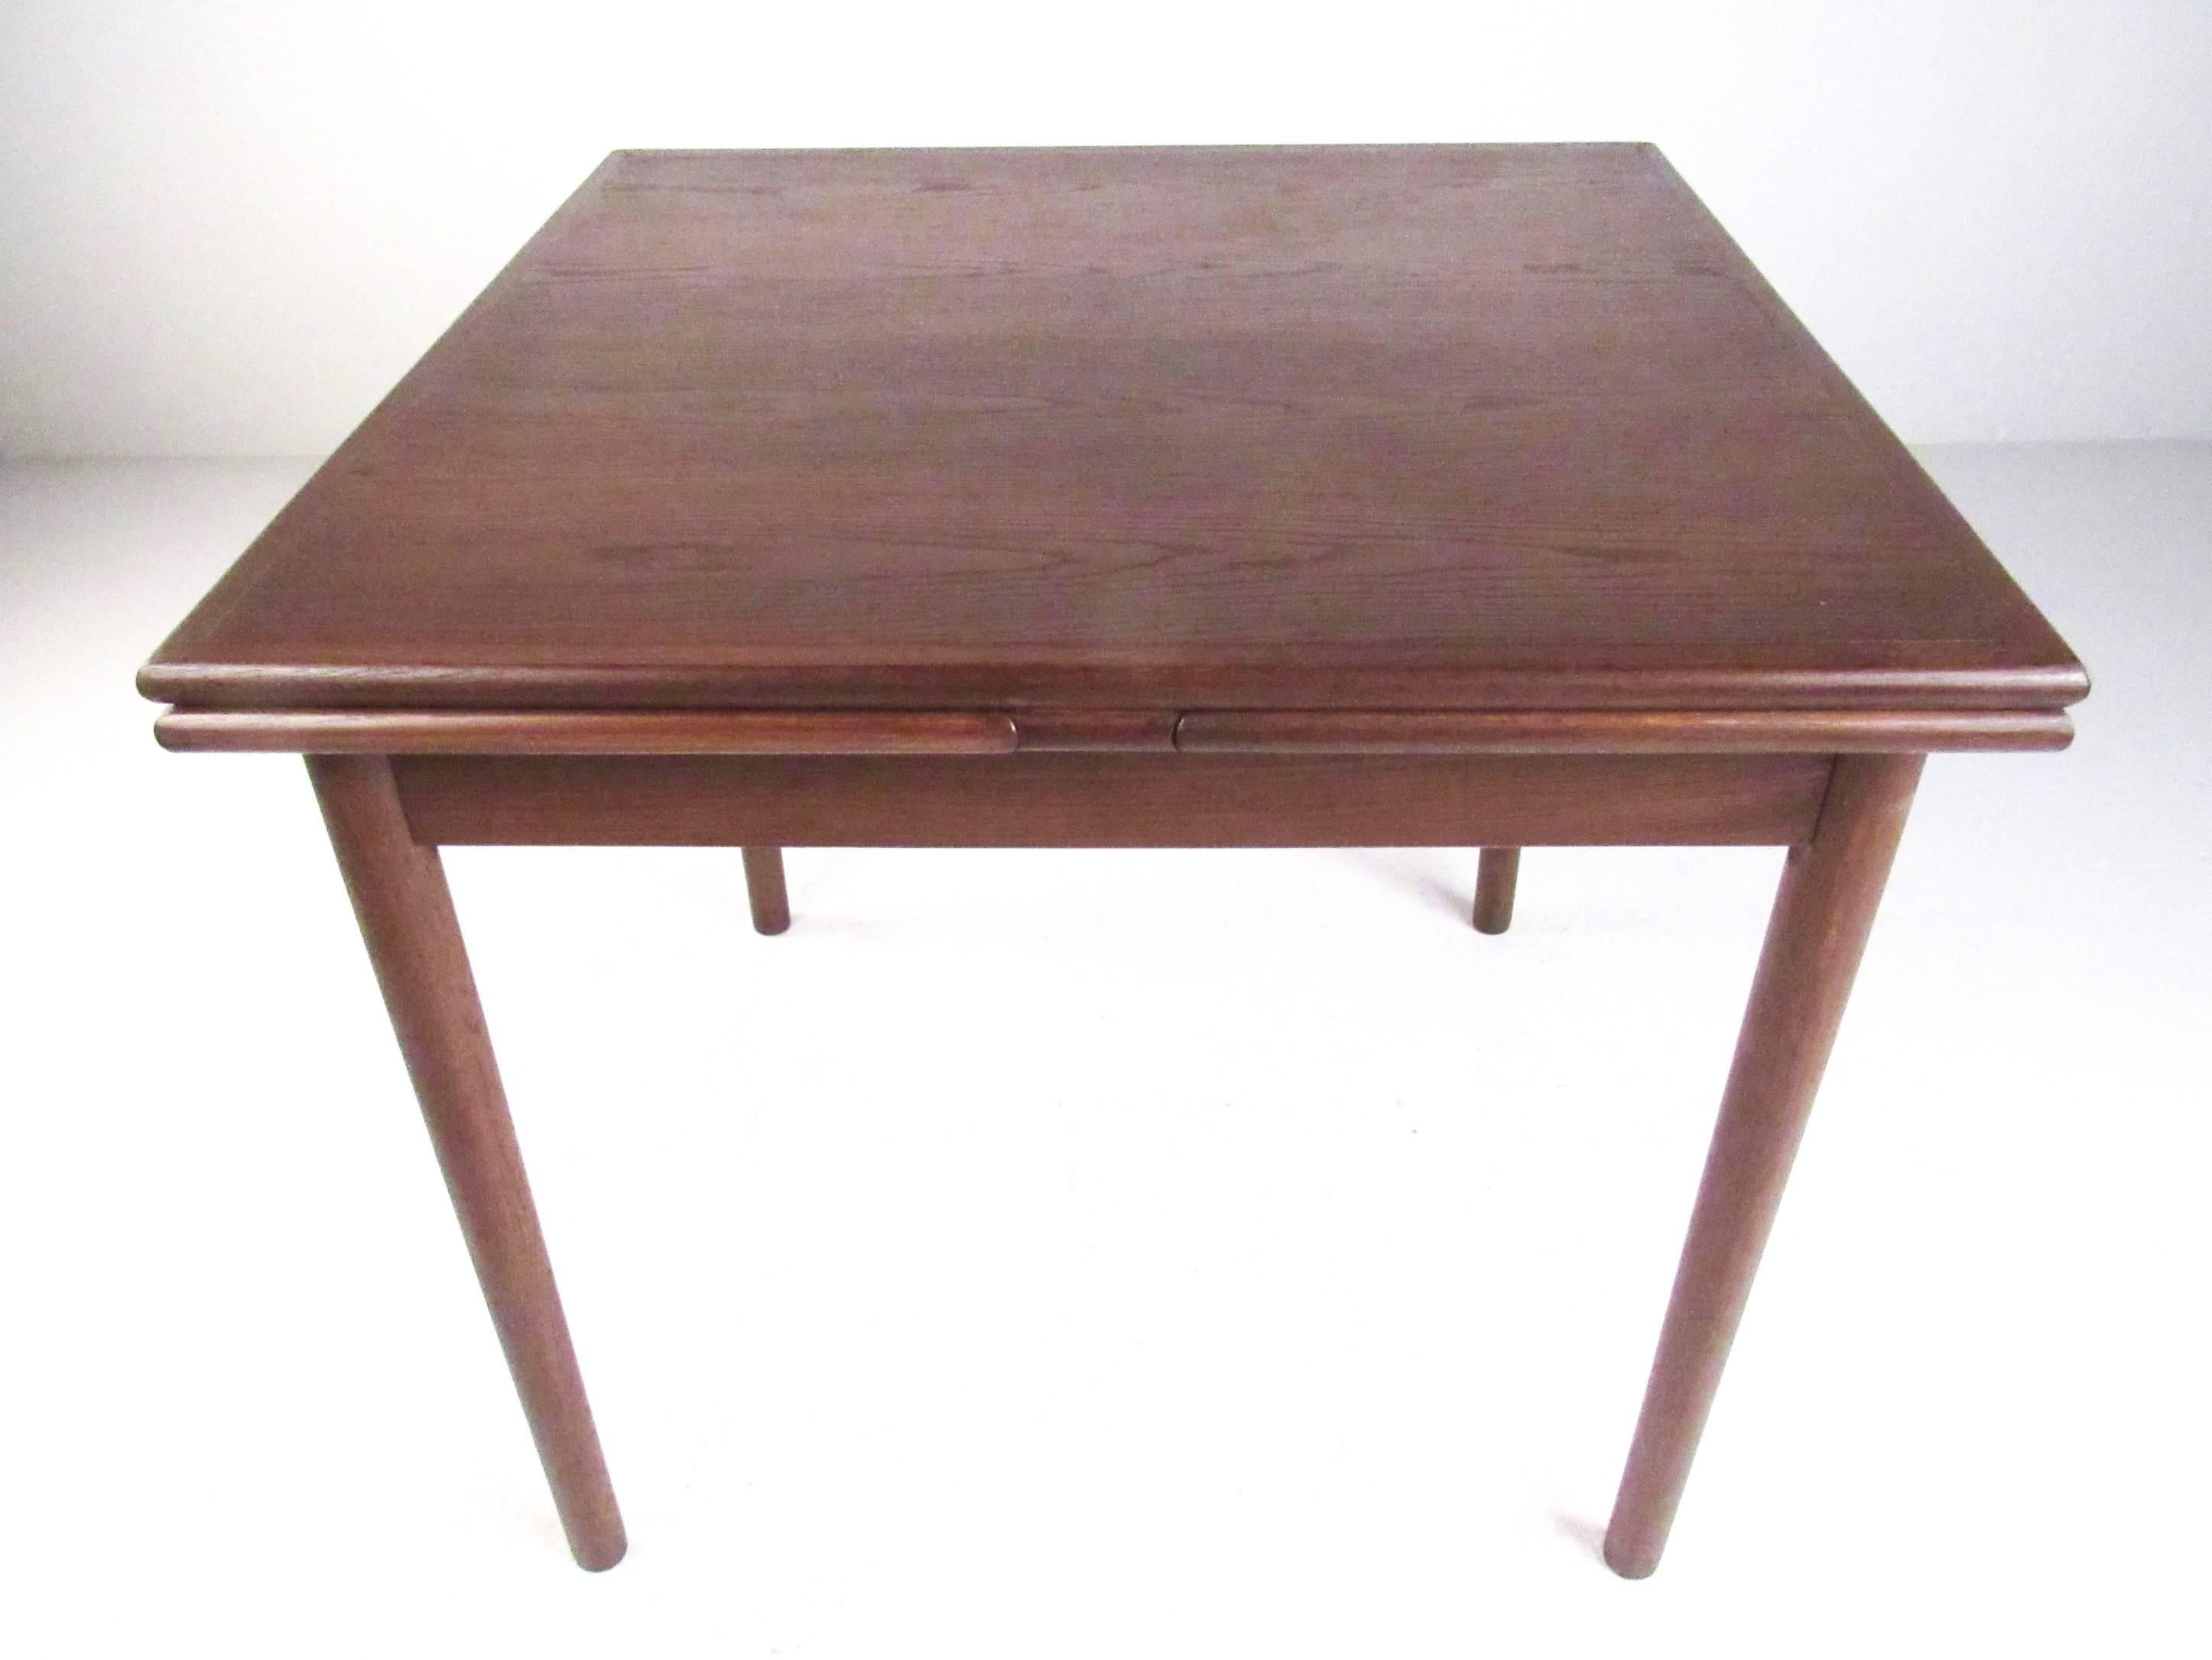 This small-scale dining table is perfect for crowded spaces, the versatility of the draw leafs make's it easy to tuck out of the way or open up for company. Vintage teak finish adds Mid-Century Scandinavian style to any interior, please confirm item